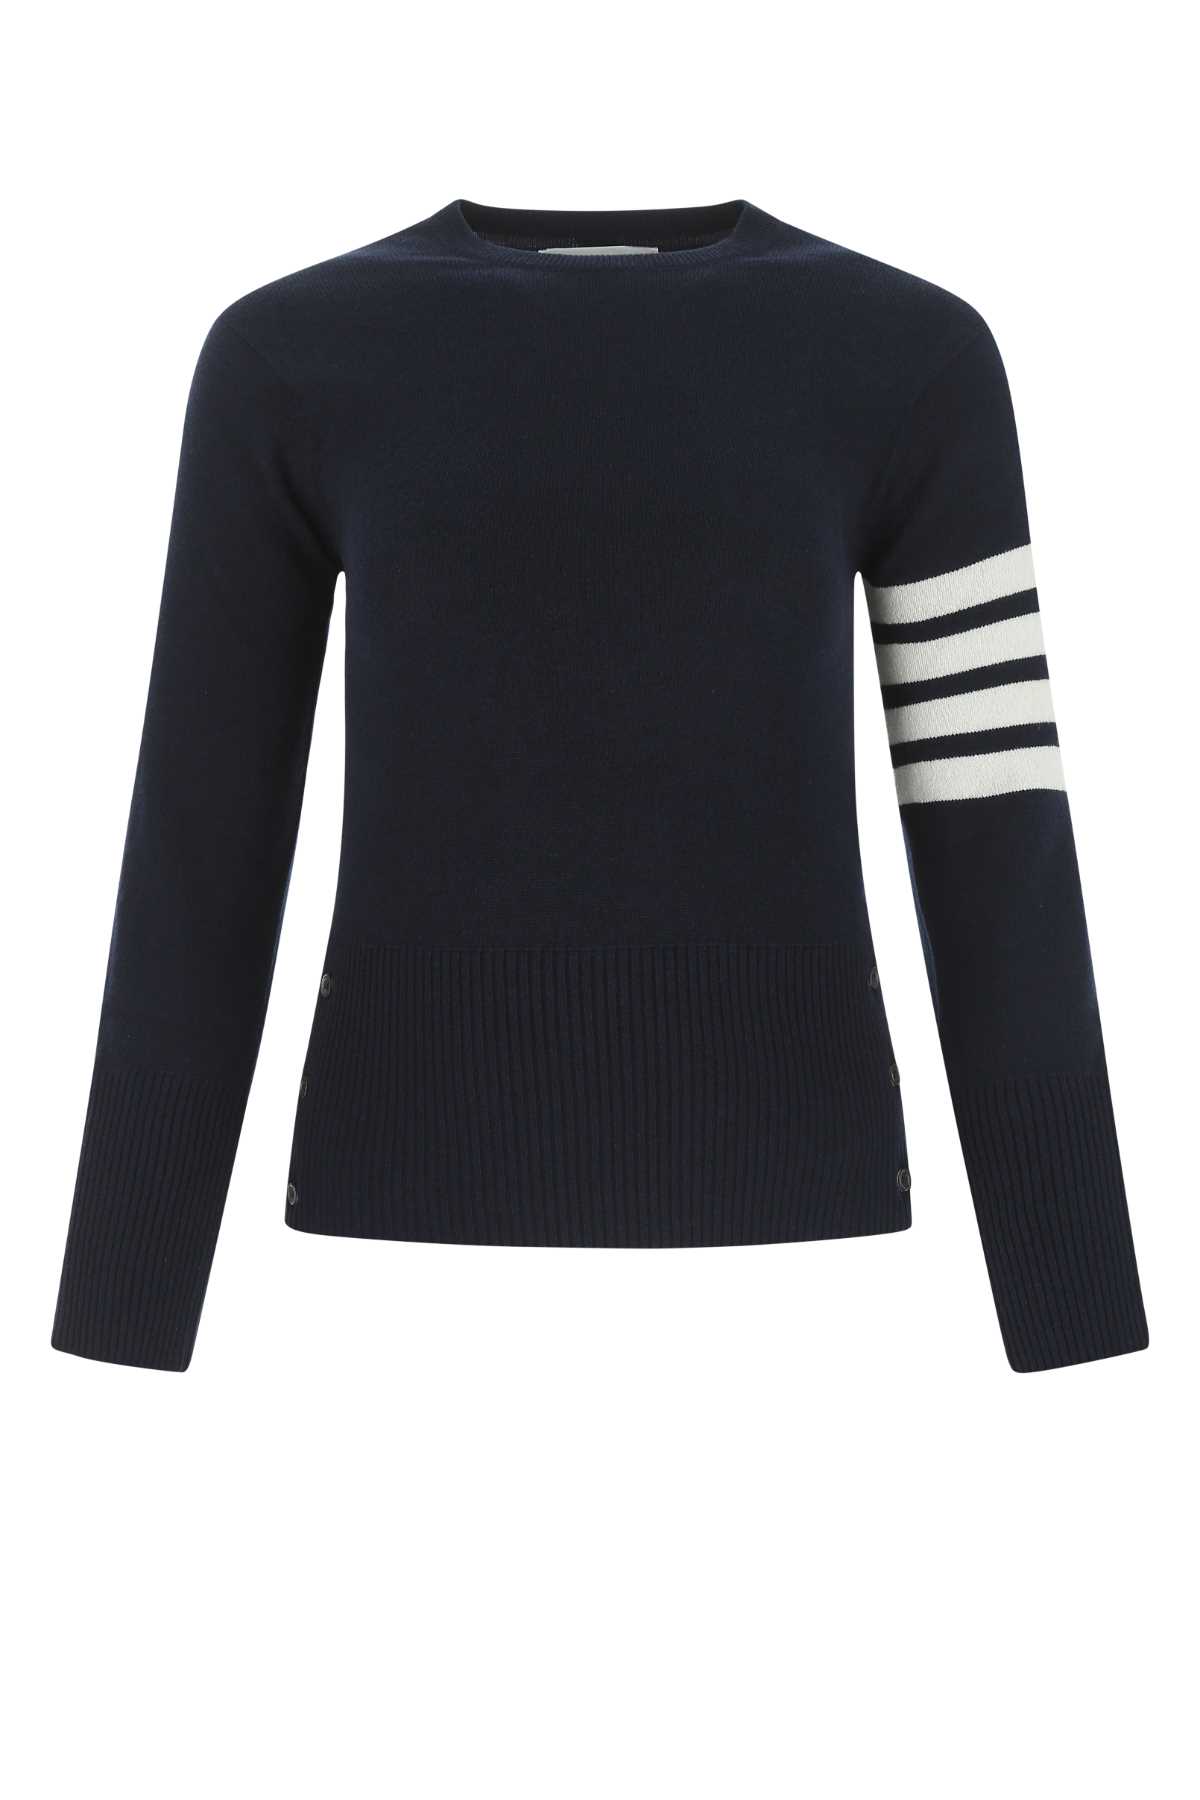 Shop Thom Browne Navy Blue Wool Sweater In 415